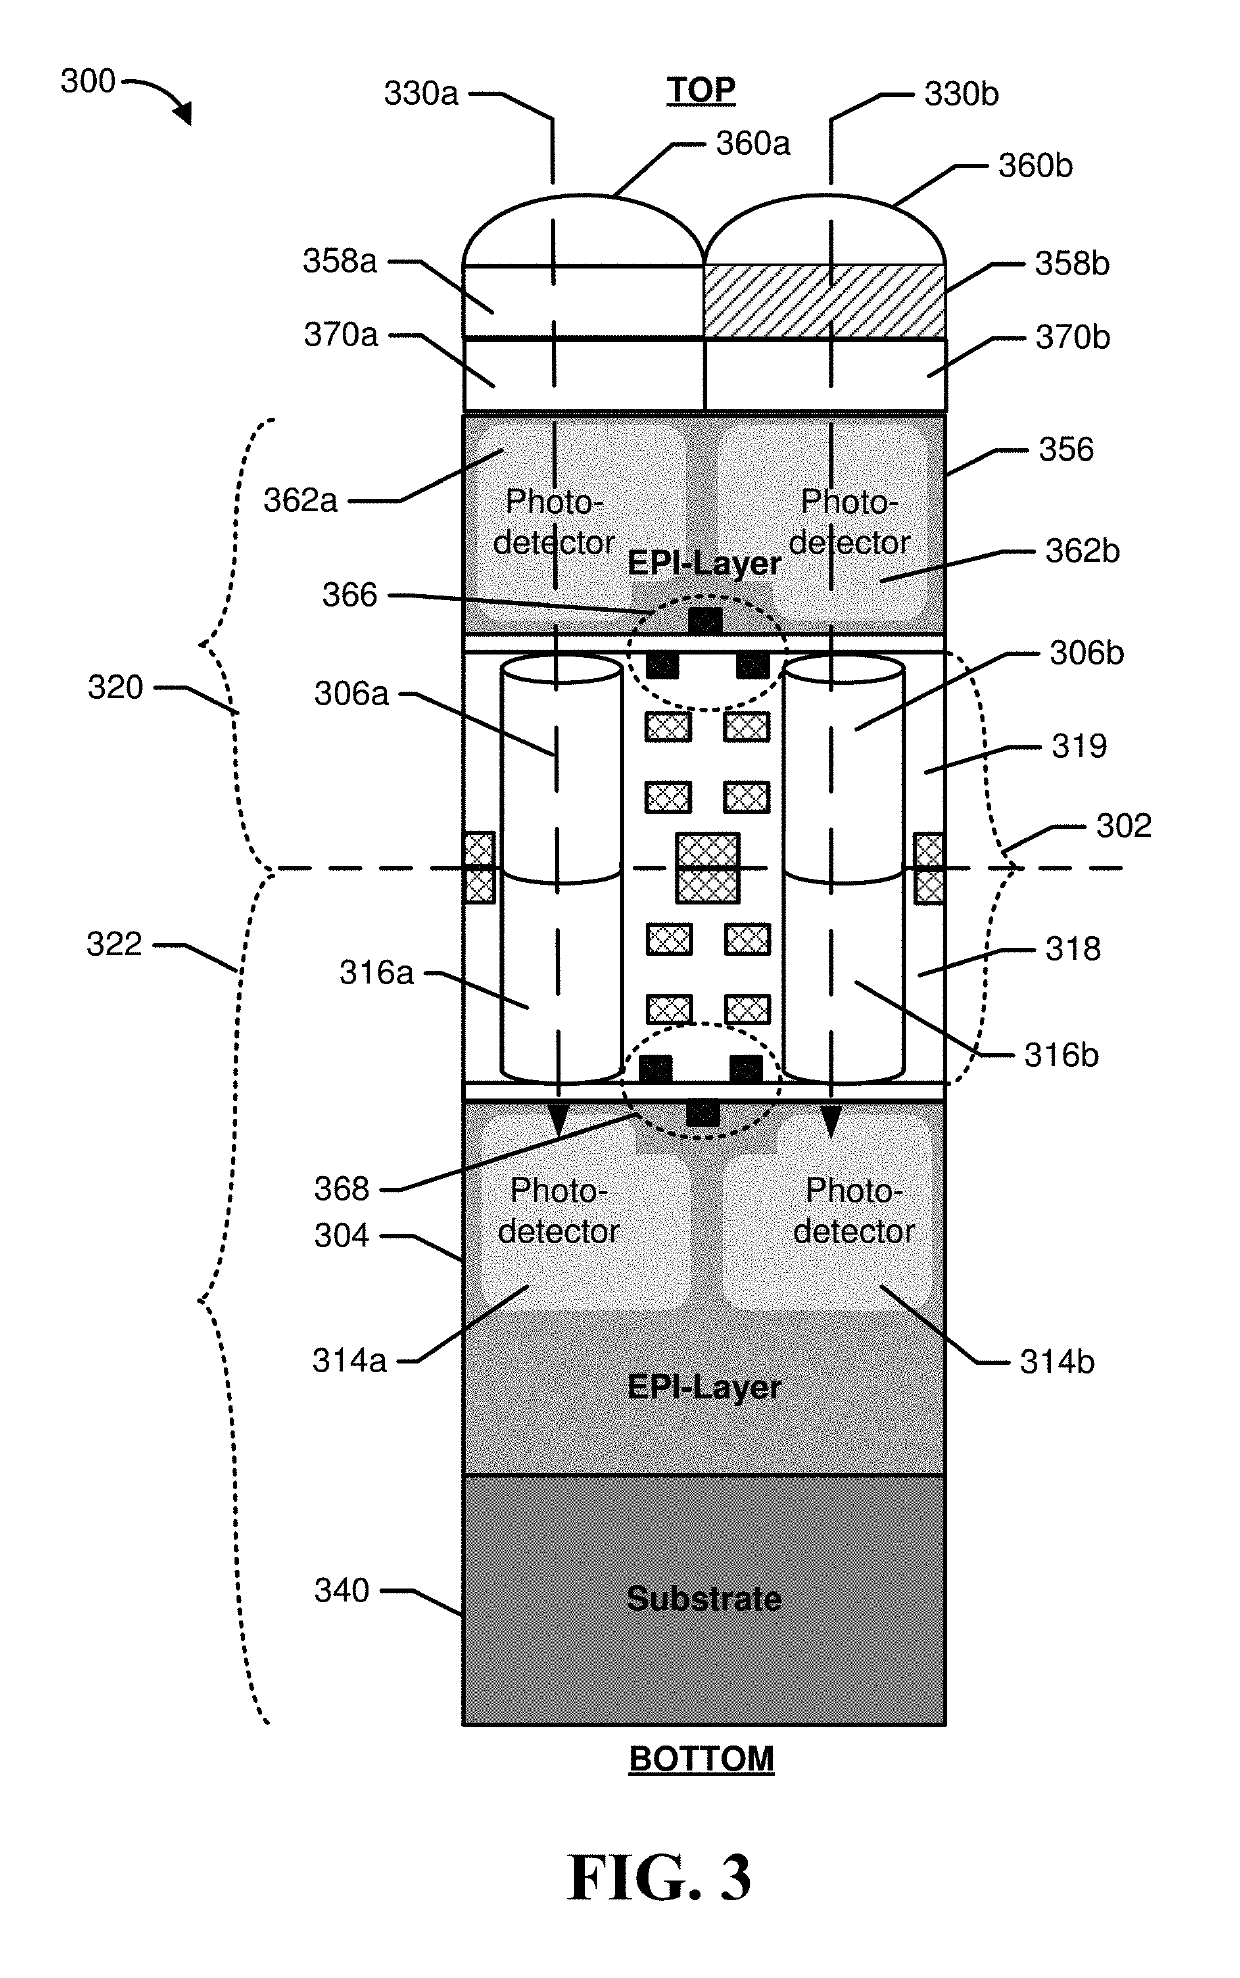 Solid state image sensor with on-chip filter and extended spectral response